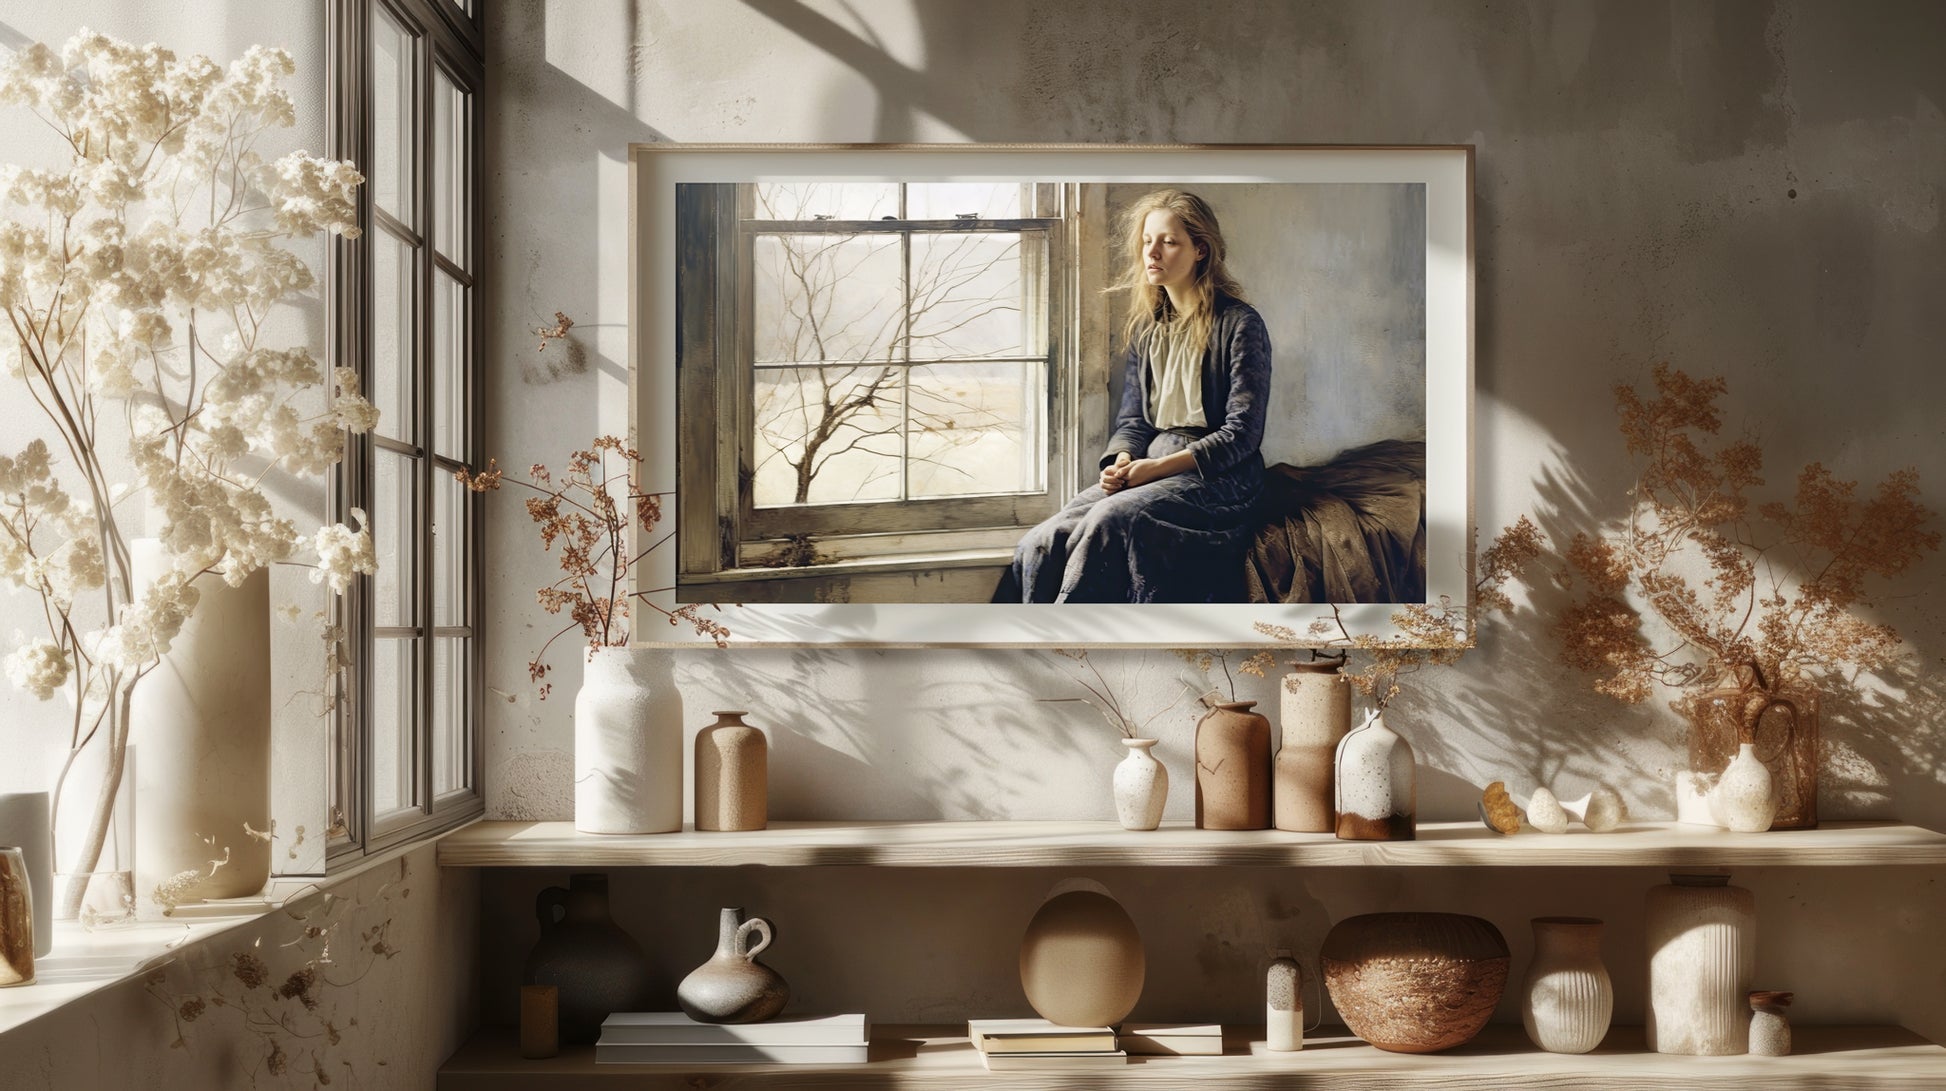 Artwork print featuring a woman seated by a window, gazing at a desolate, misty landscape with a barren tree.